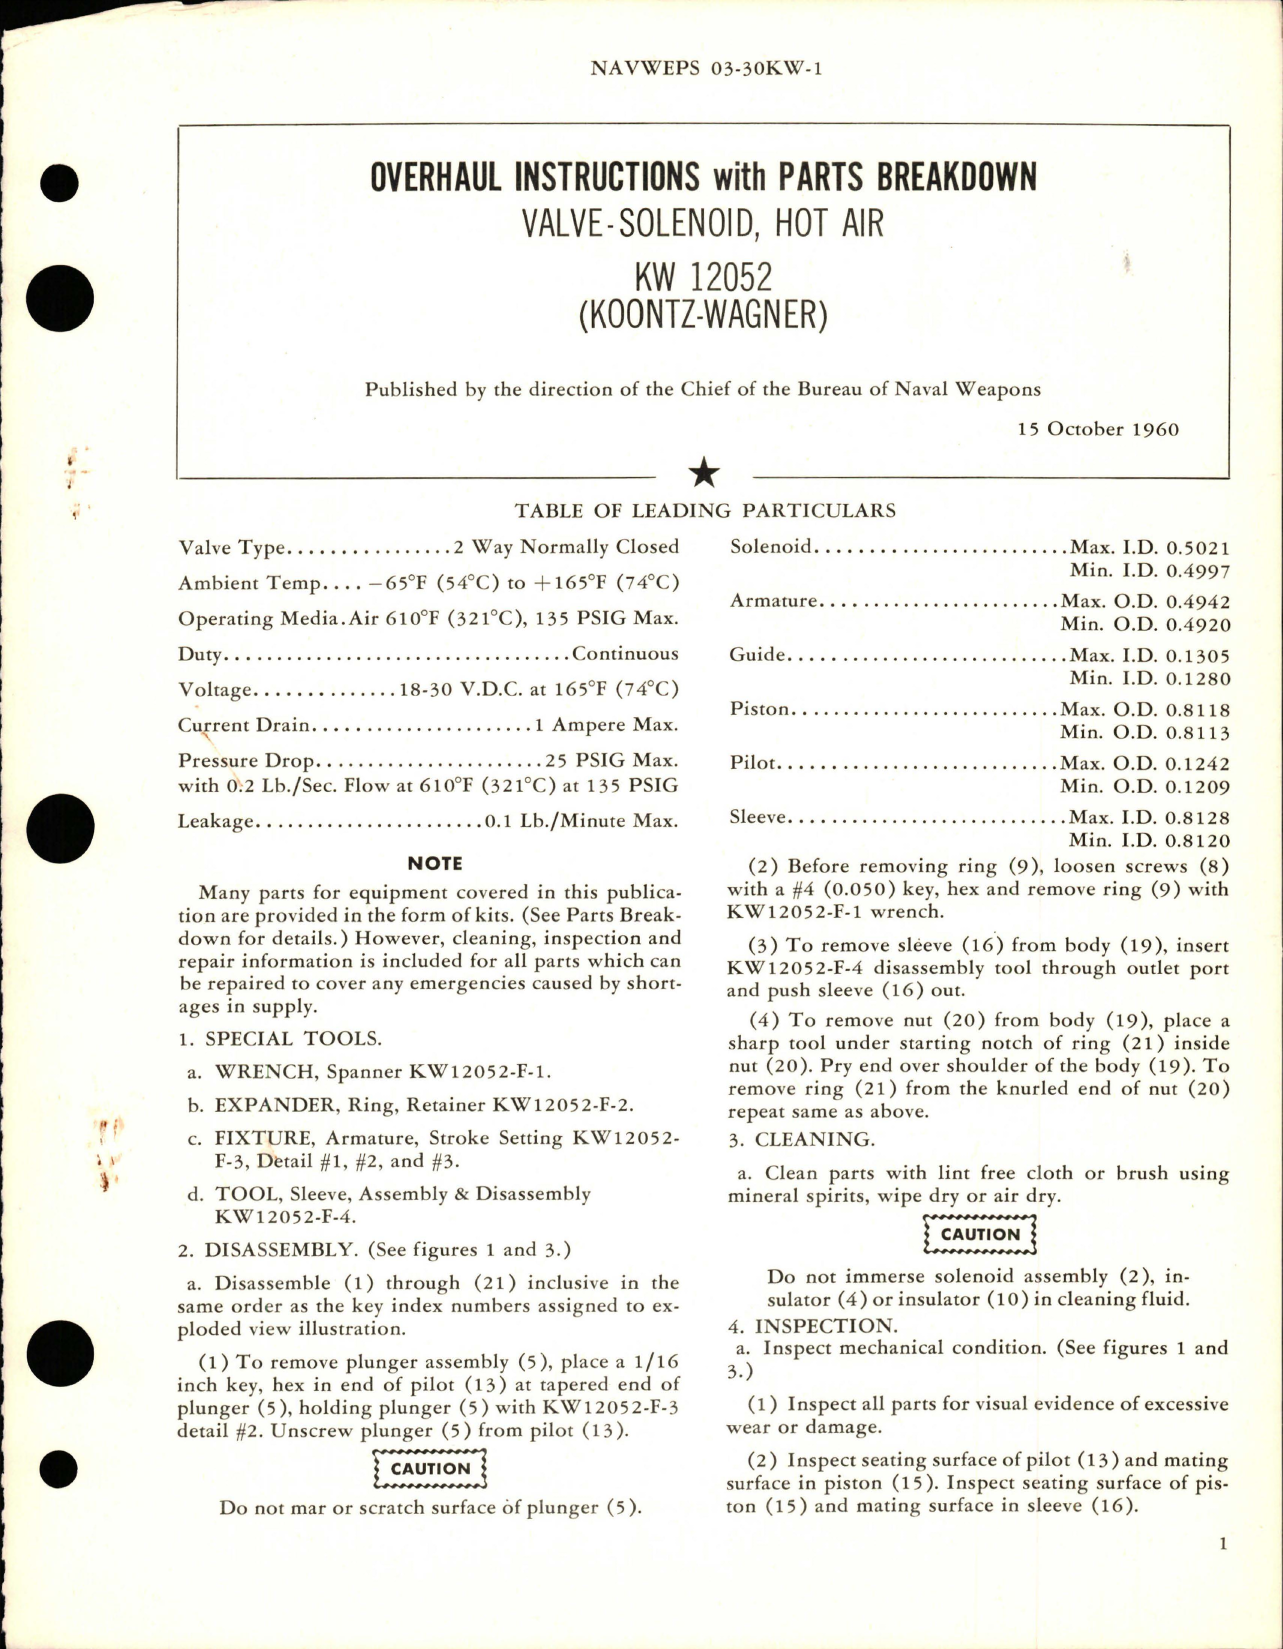 Sample page 1 from AirCorps Library document: Overhaul Instructions with Parts Breakdown for Hot Air Solenoid Valve - KW 12052 